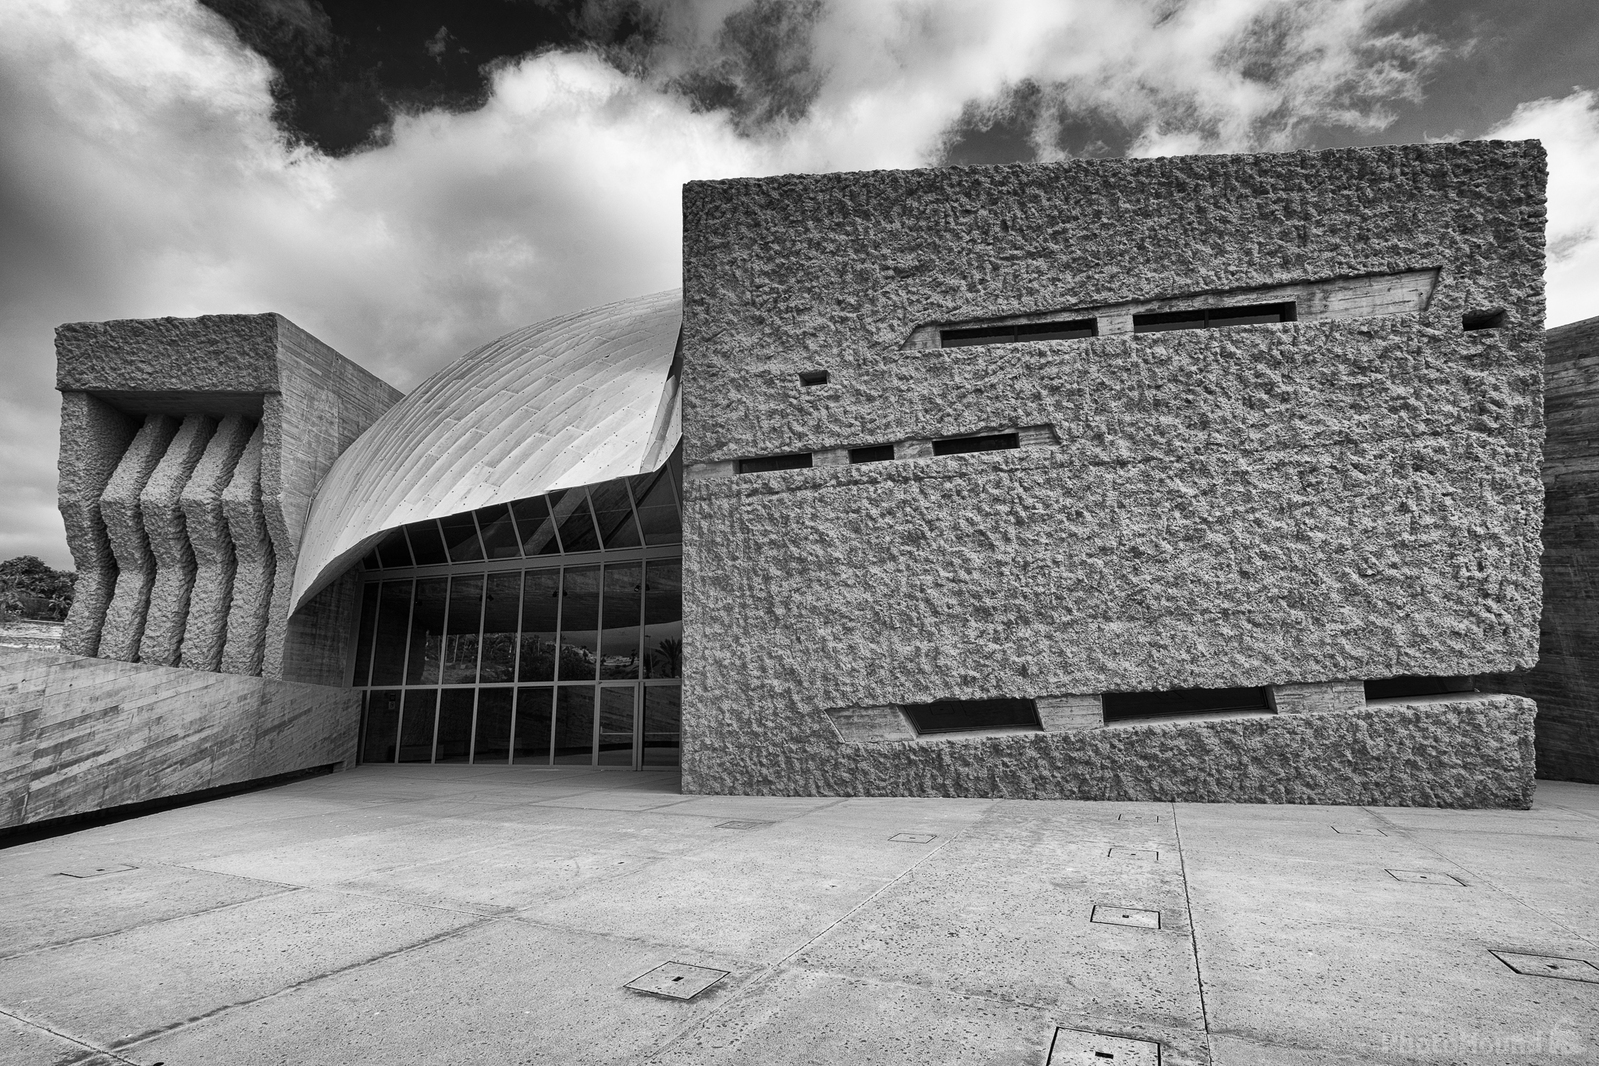 Image of Magma Art & Congress building by James Billings.